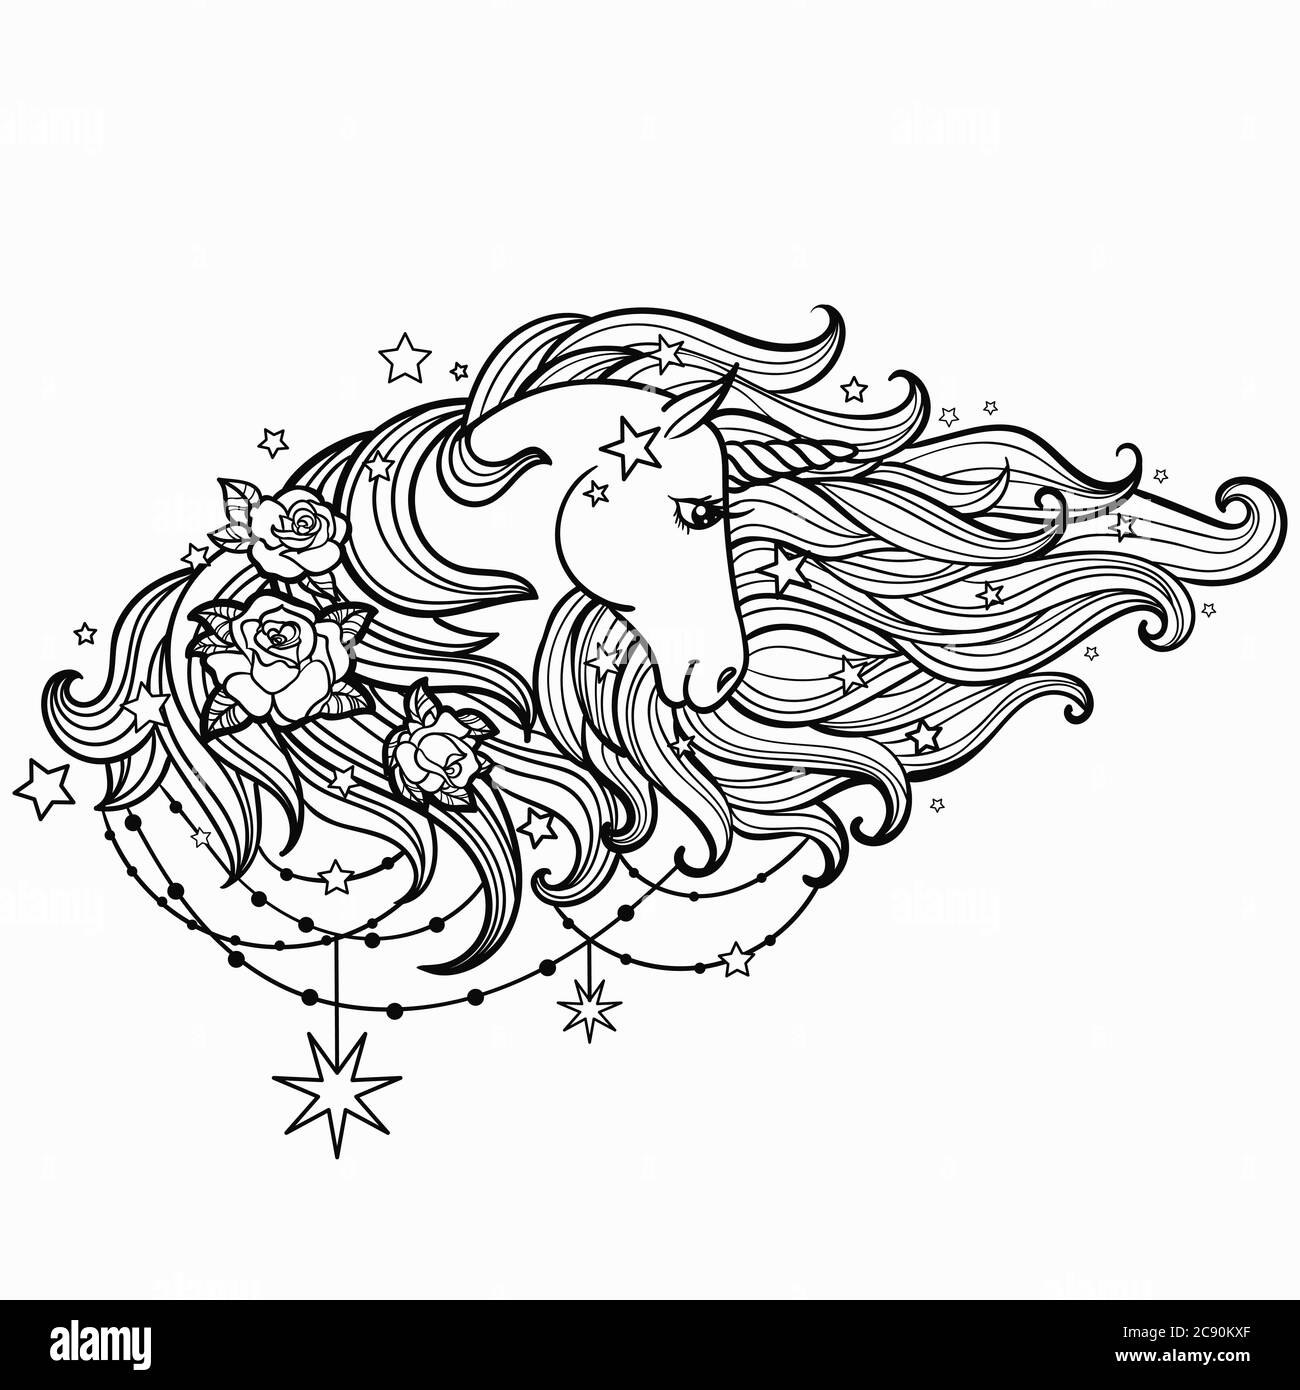 Unicorn with a long mane and roses. Black and white. For tattoo design, coloring books, graphic prints, cards. Vector illustration Stock Vector